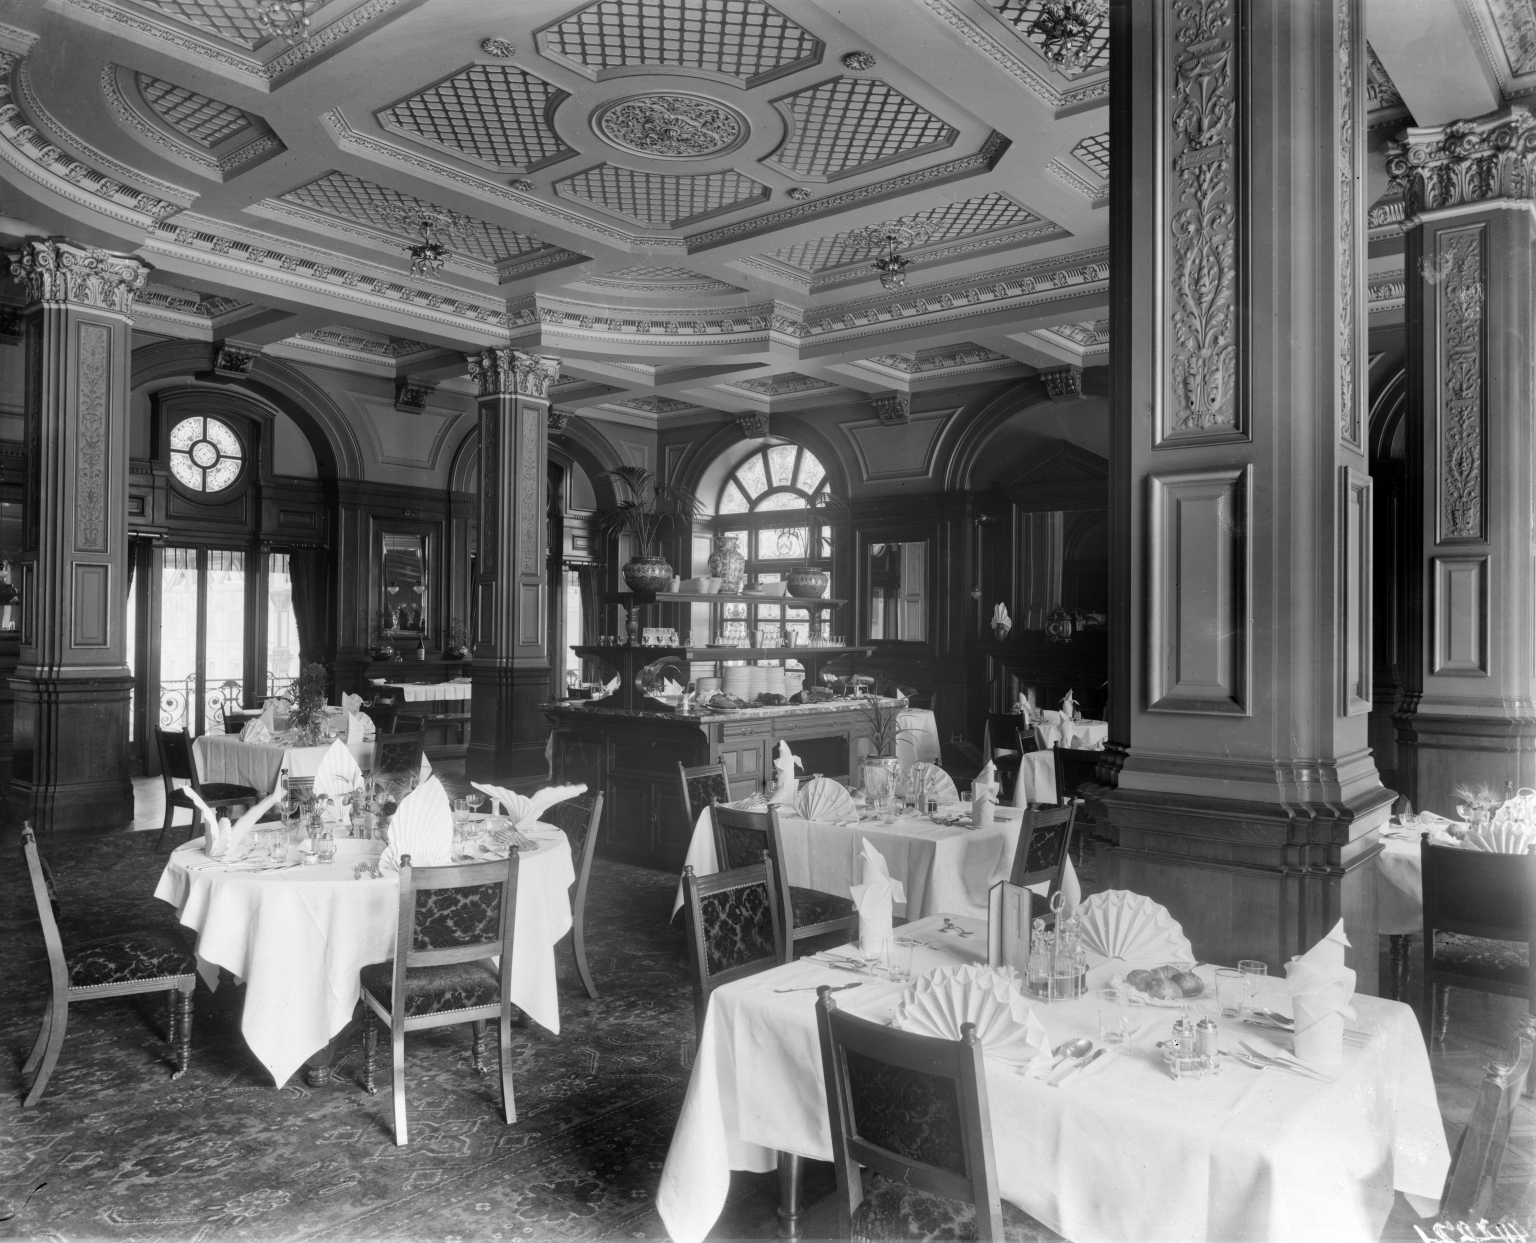 Bradford Midland Hotel is one of many mentioned in the documents. © National Railway Museum / SSPL.